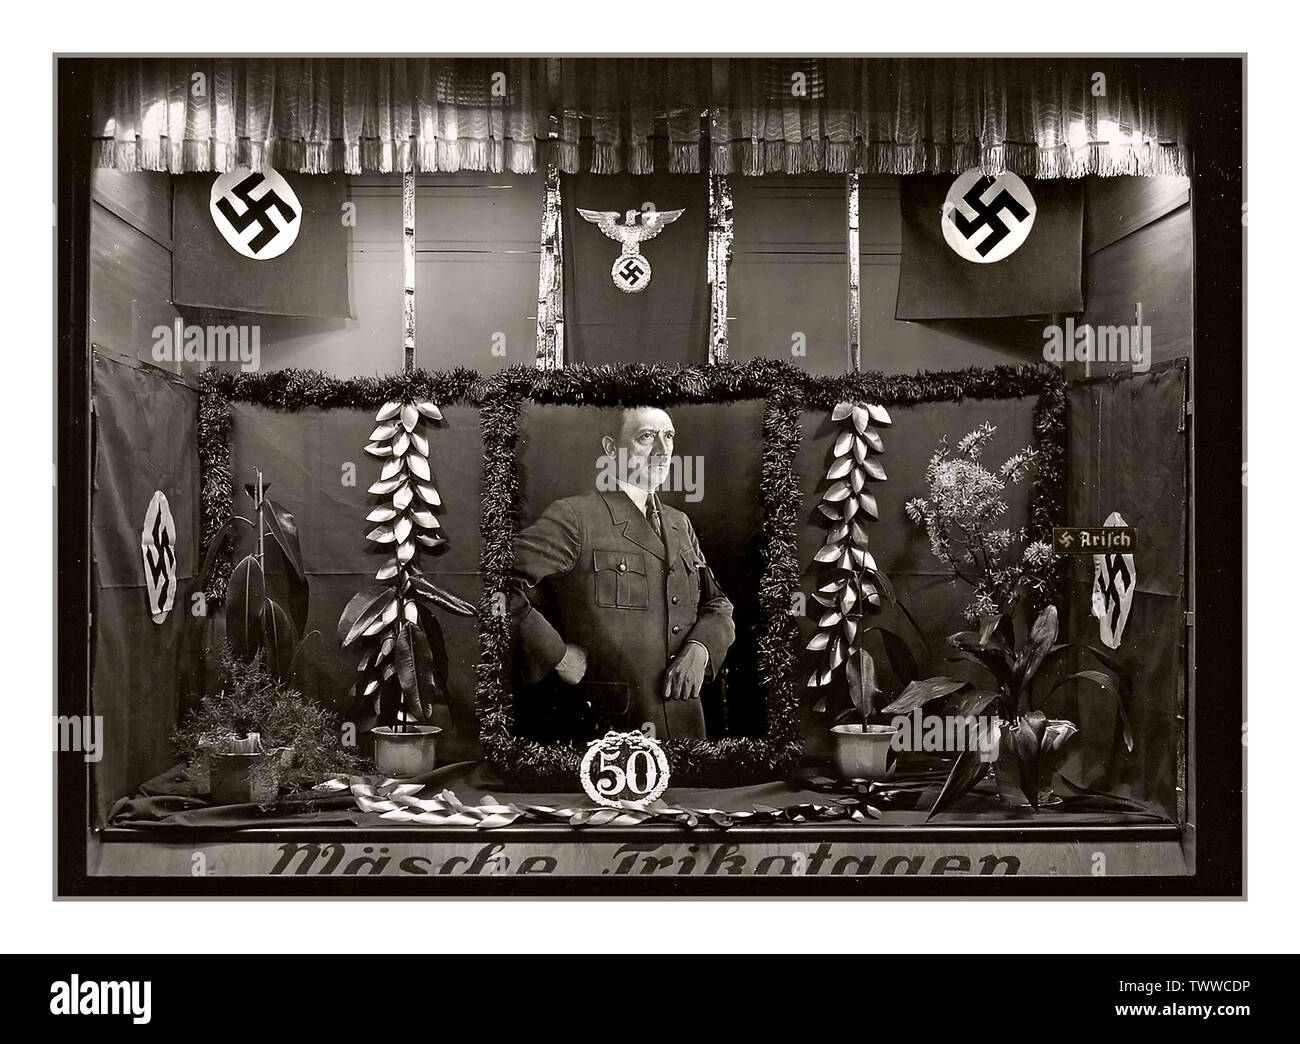 Vintage 1939 Adolf Hitler shop window display celebrating his 50th Birthday On 18 April 1939, the government of Germany declared that their Führer Adolf Hitler's birthday (20 April) was to be a national holiday. Festivities took place in all municipalities throughout the country. Stock Photo